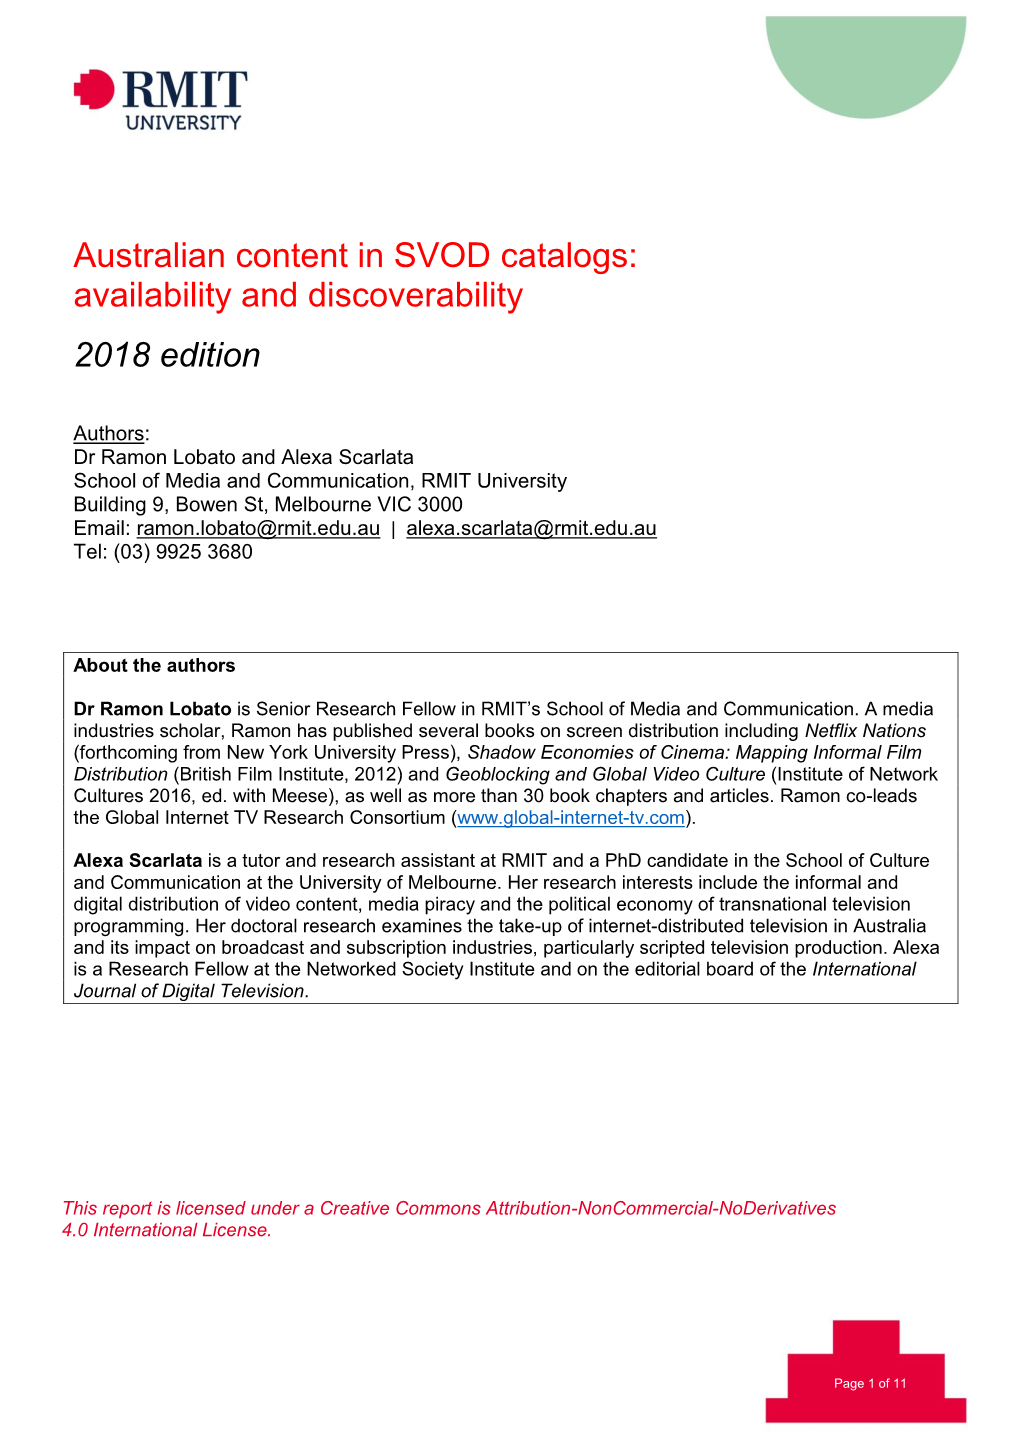 Australian Content in SVOD Catalogs: Availability and Discoverability 2018 Edition